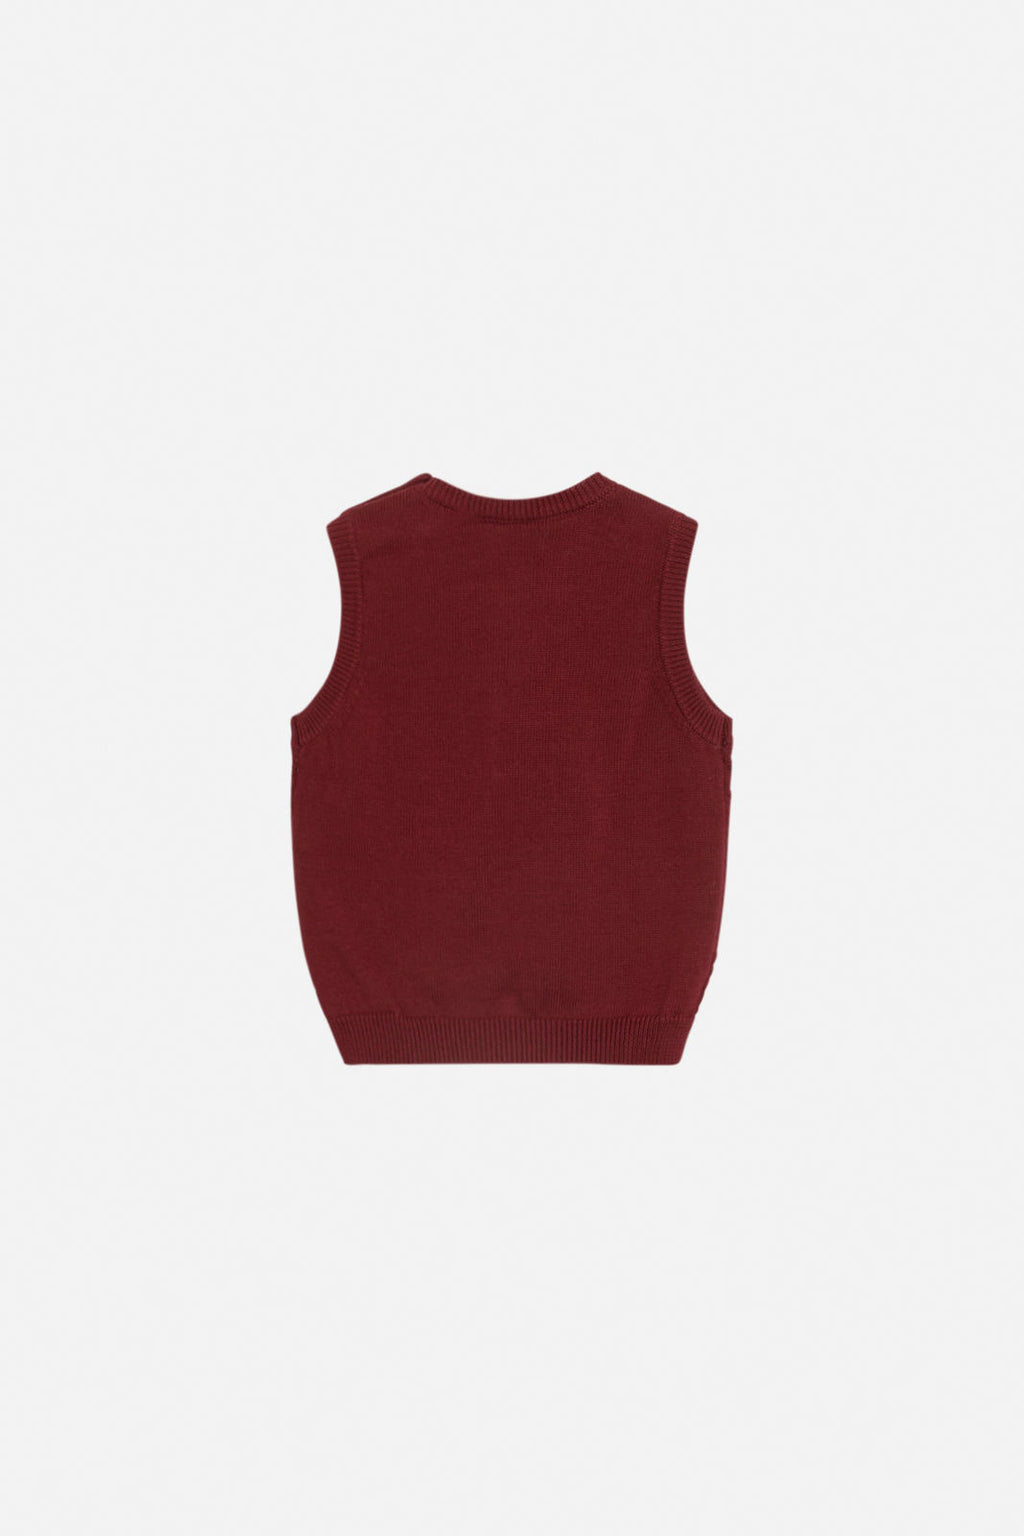 Hust and Claire Perry Vest Ruby Wine